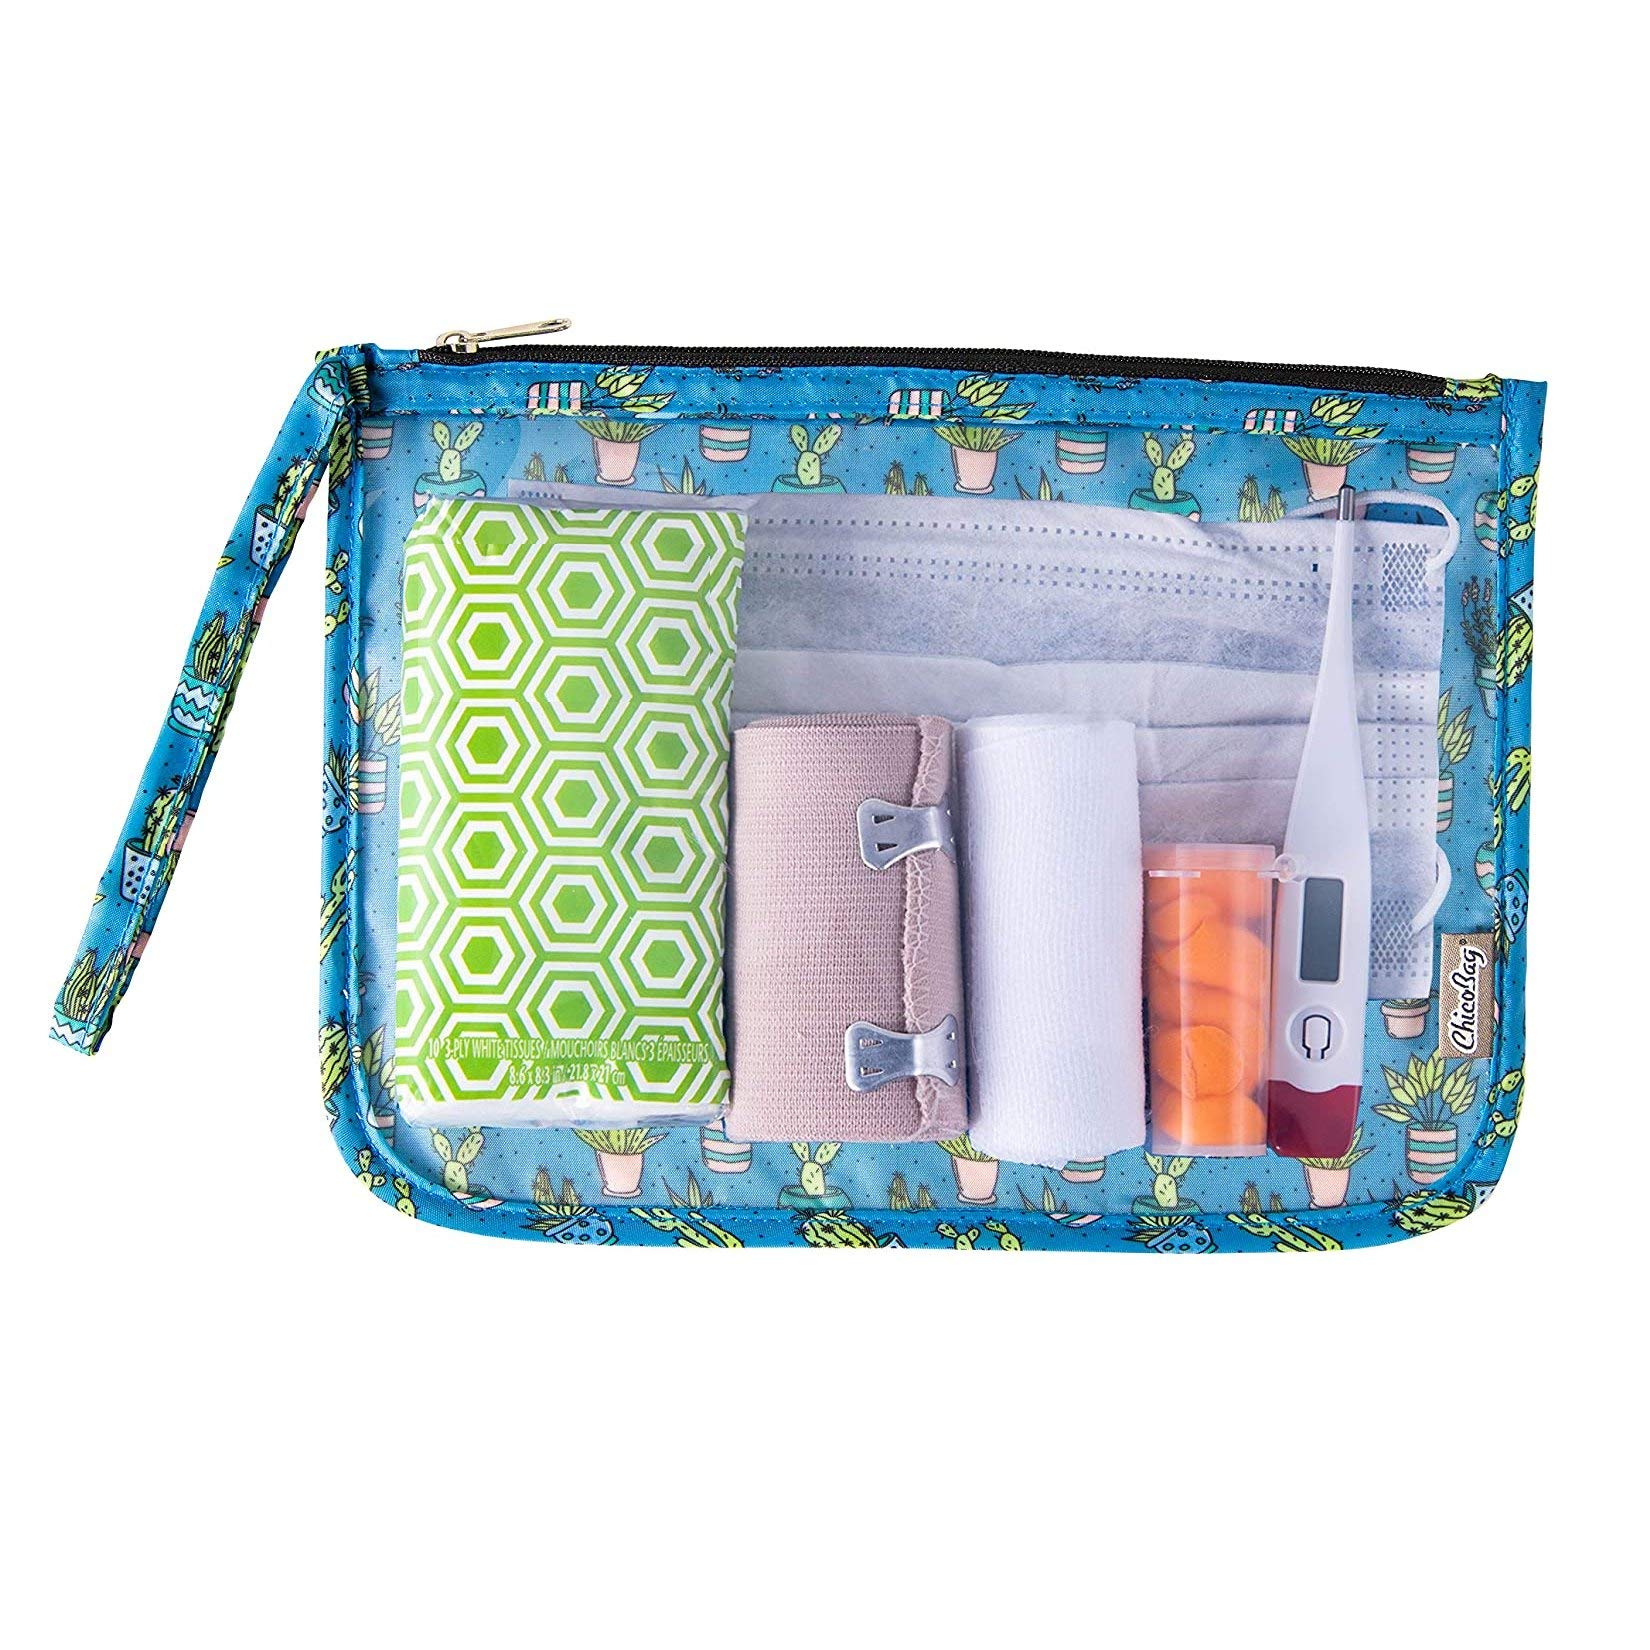 ChicoBag Travel Zip Pouches | Reusable Travel Pouch w/Zipper & Clear Front | TSA Approved | Eco Friendly & Eco-Conscious | Small, Medium, Quart Size Set | Cactus Pattern (Pack of 3)